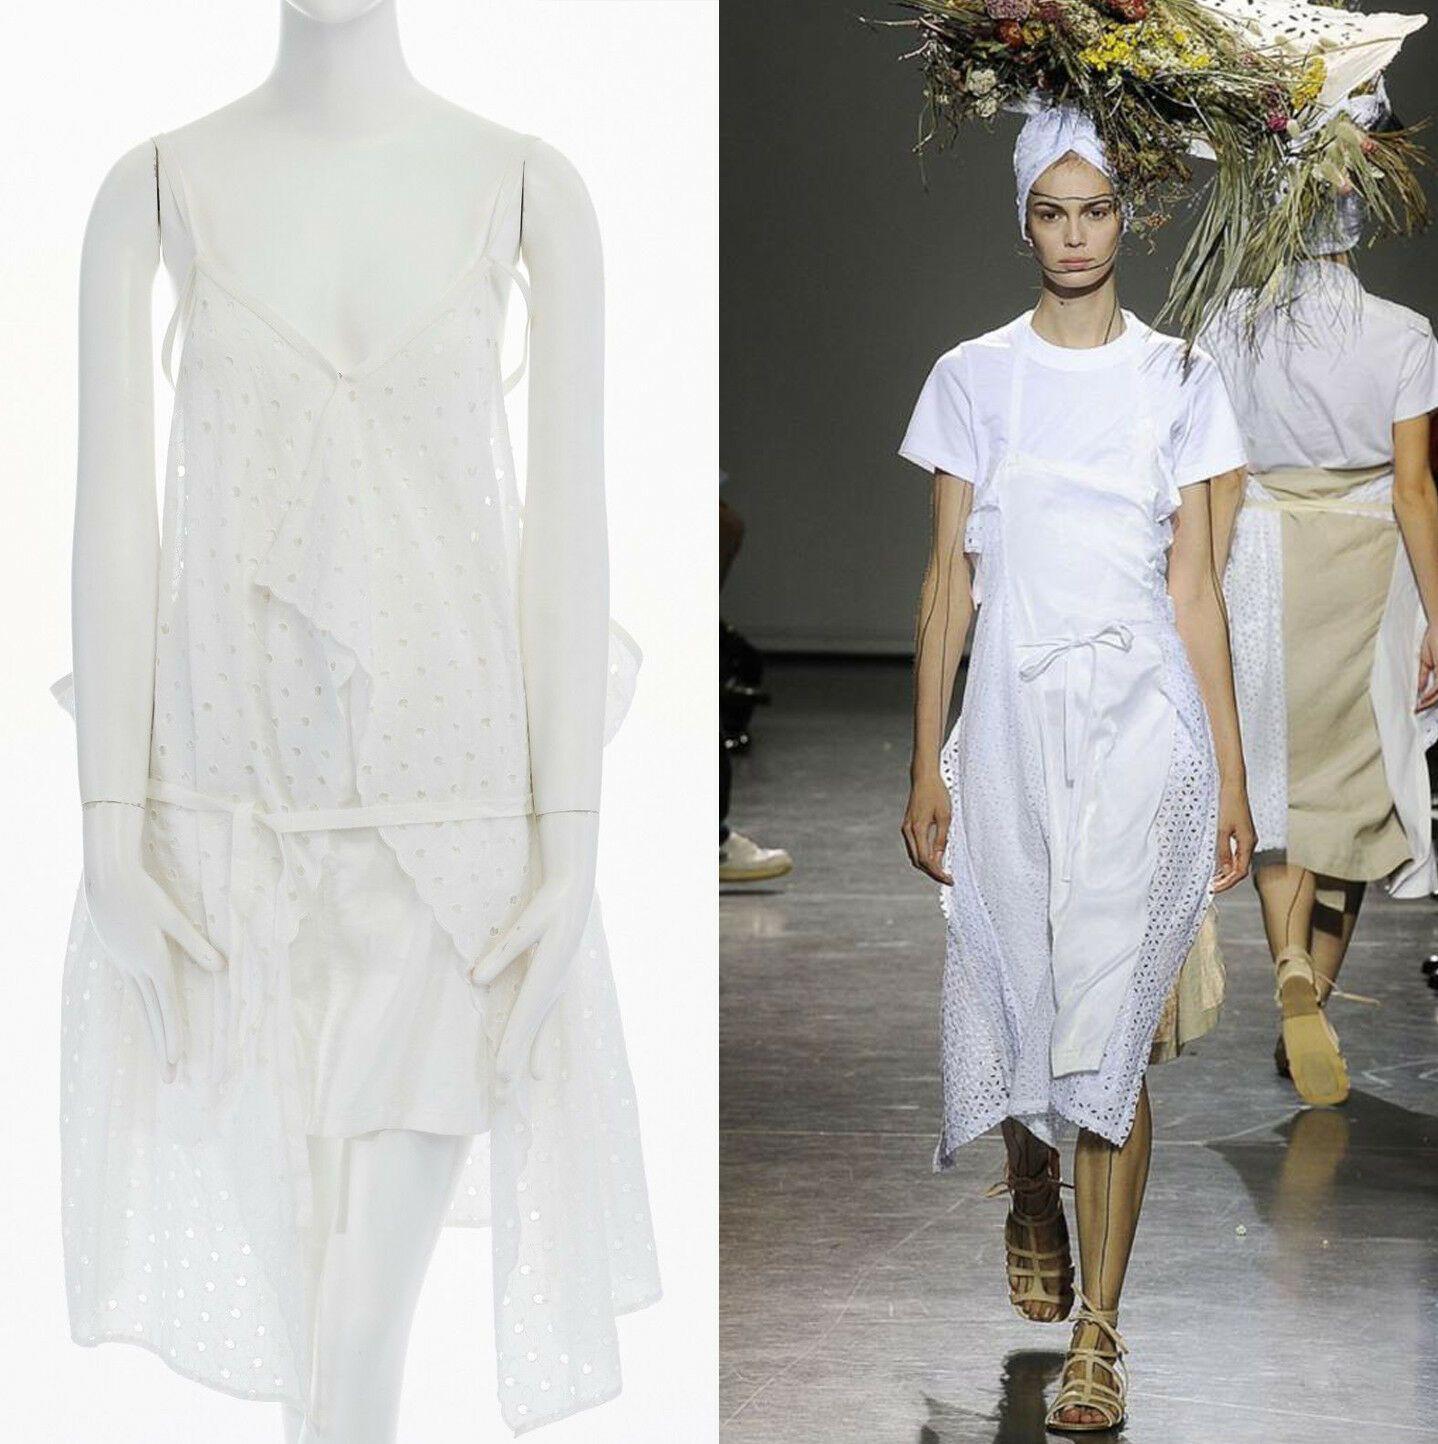 new JUNYA WATANABE 2011 white embroidery anglais open draped front vest dress S

JUNYA WATANABE
SIMILAR STYLE ON 2009 RUNWAY, RE-PRODUCTION IN 2011
Cotton. White. Embroidery anglais. Draped open front. Single hook eye closure at front. Button zip